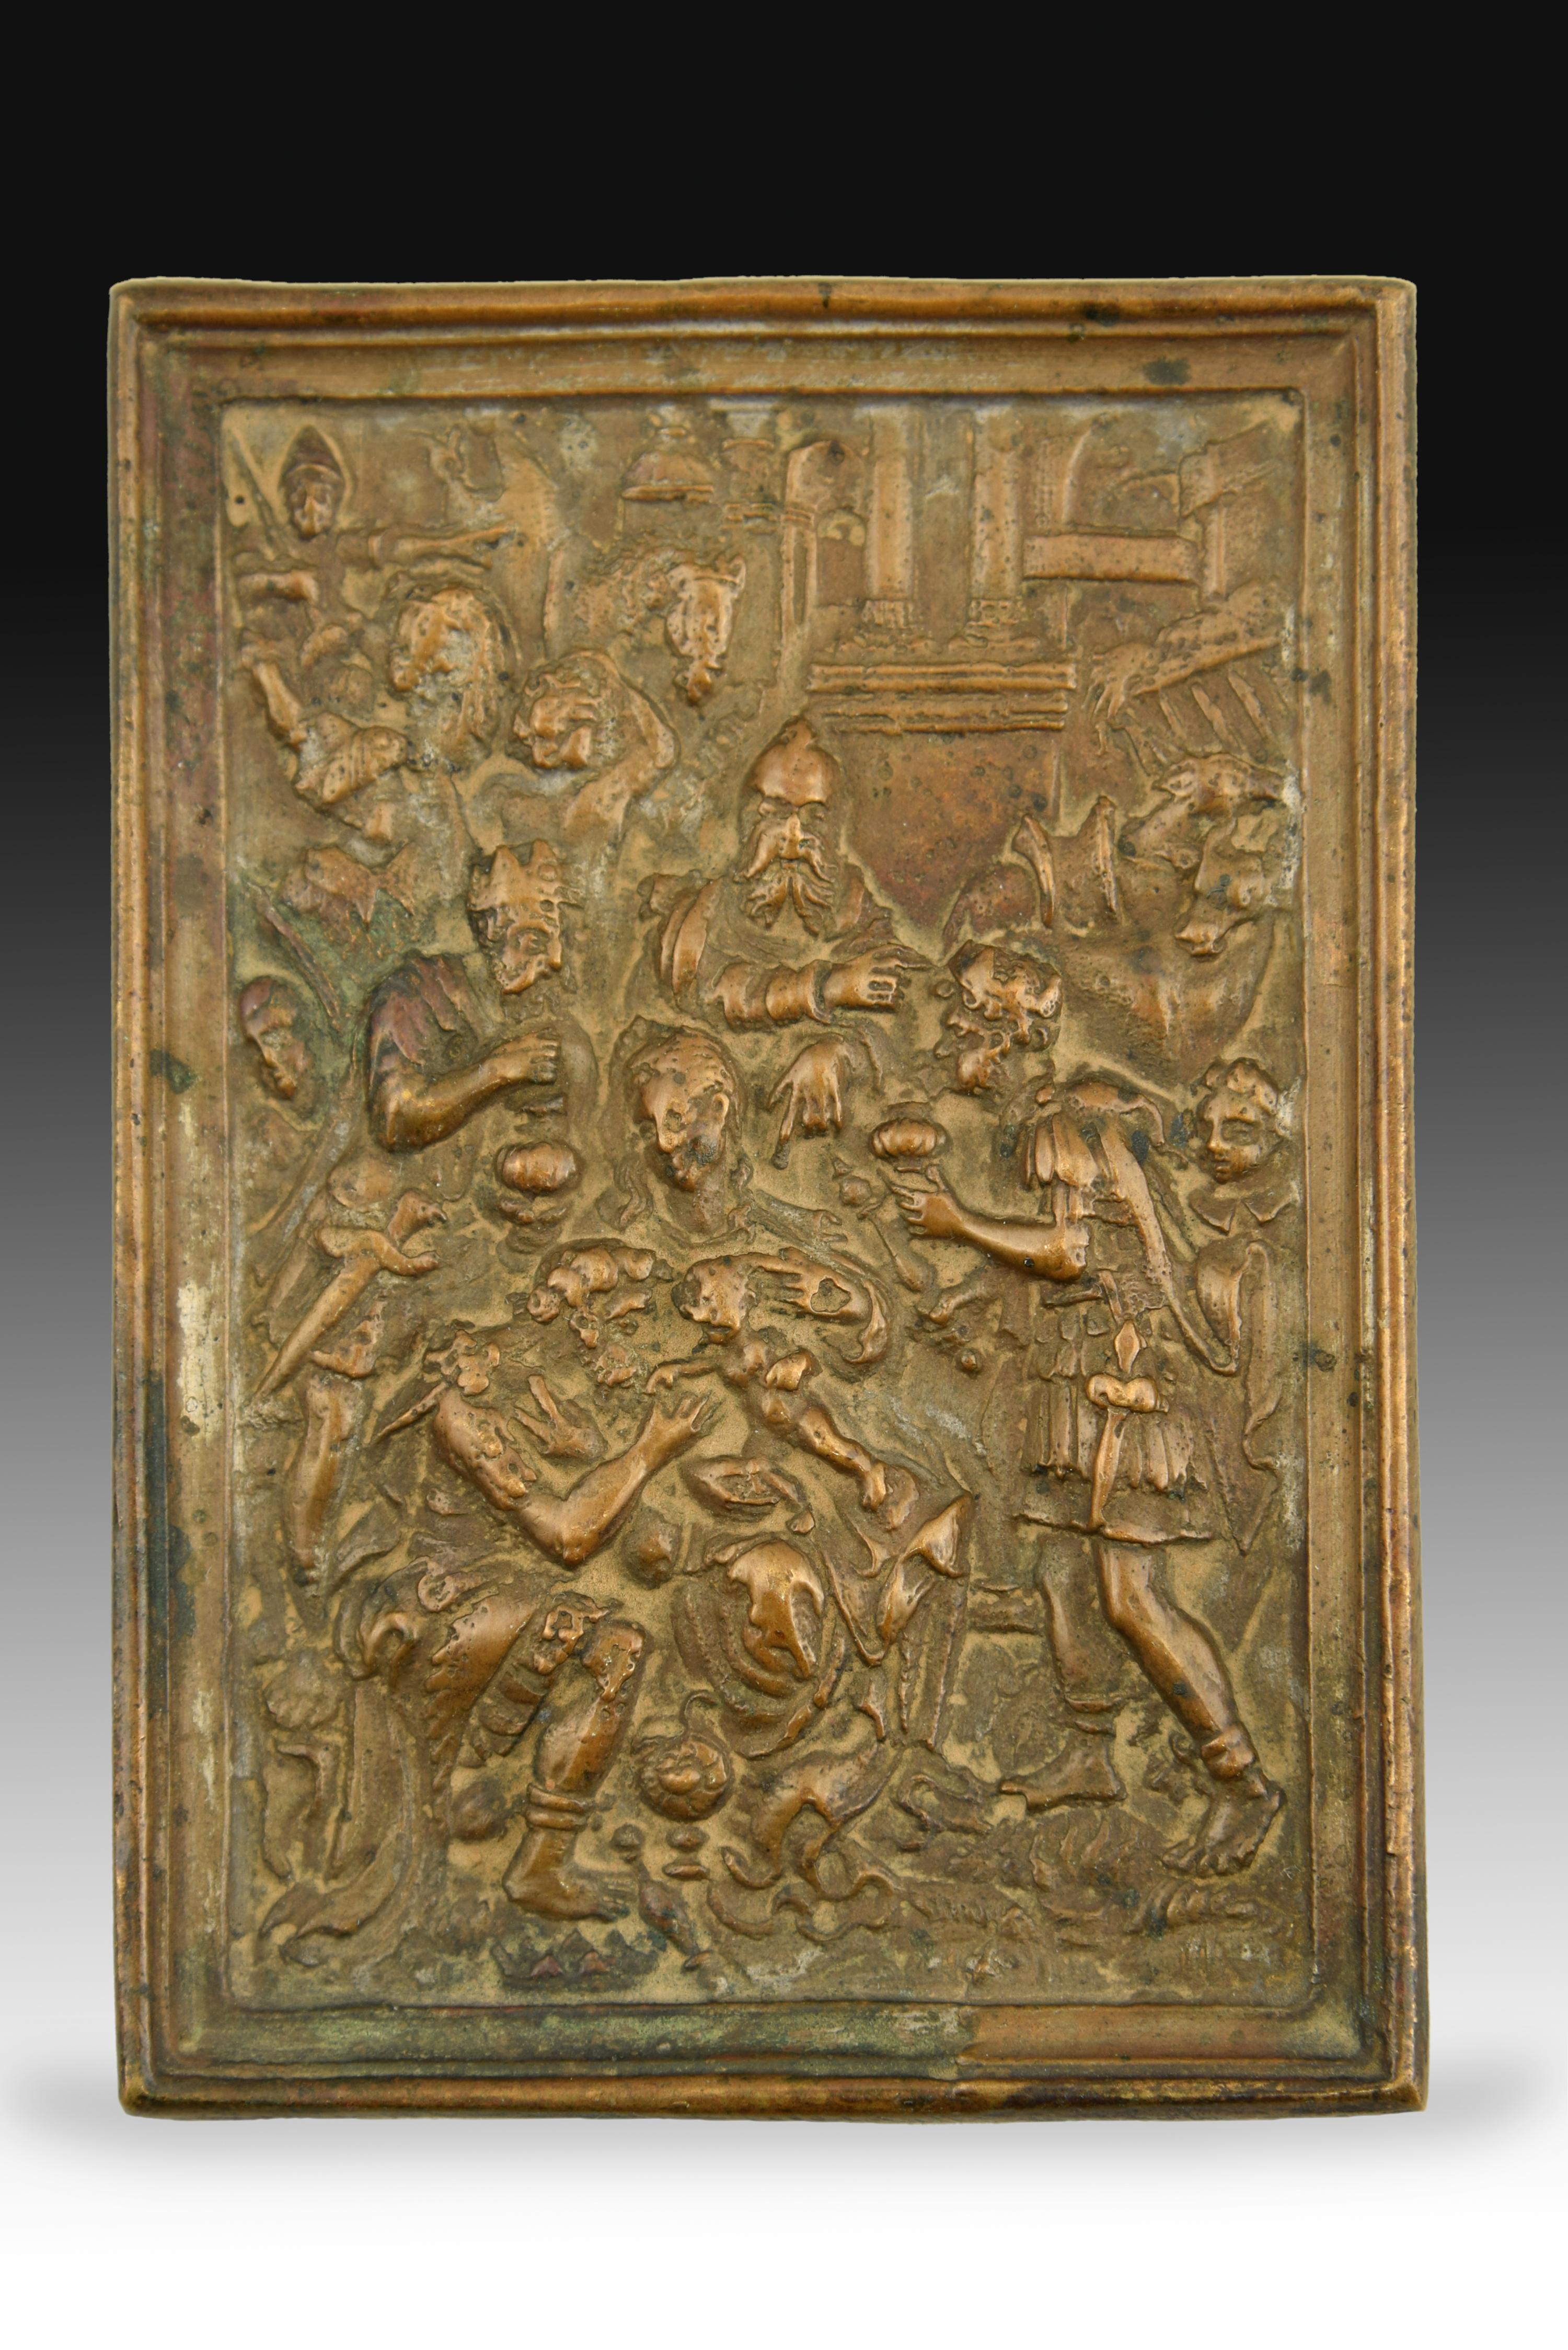 Devotional plaque, Birth of Christ. Bronze. Spain, 16th-17th centuries.
Rectangular devotional plate made of bronze, which presents the scene of the Birth of Jesus in relief. The Virgin Mary has the Child standing on her knees in the foreground,